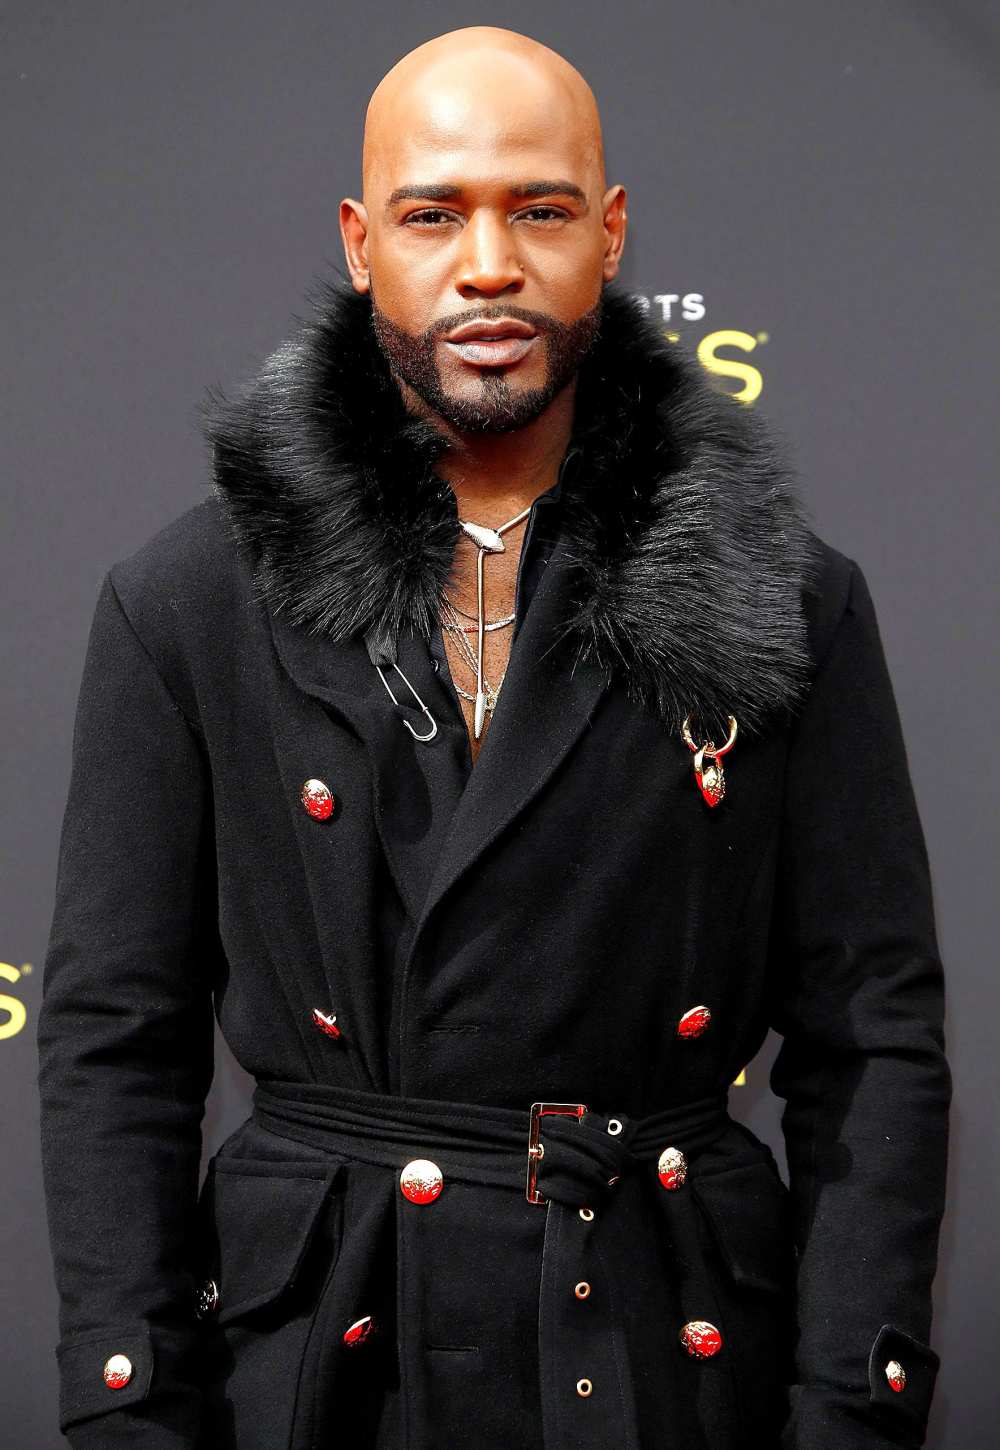 Karamo Brown Hoped His Sons Wouldnt Follow His Footsteps